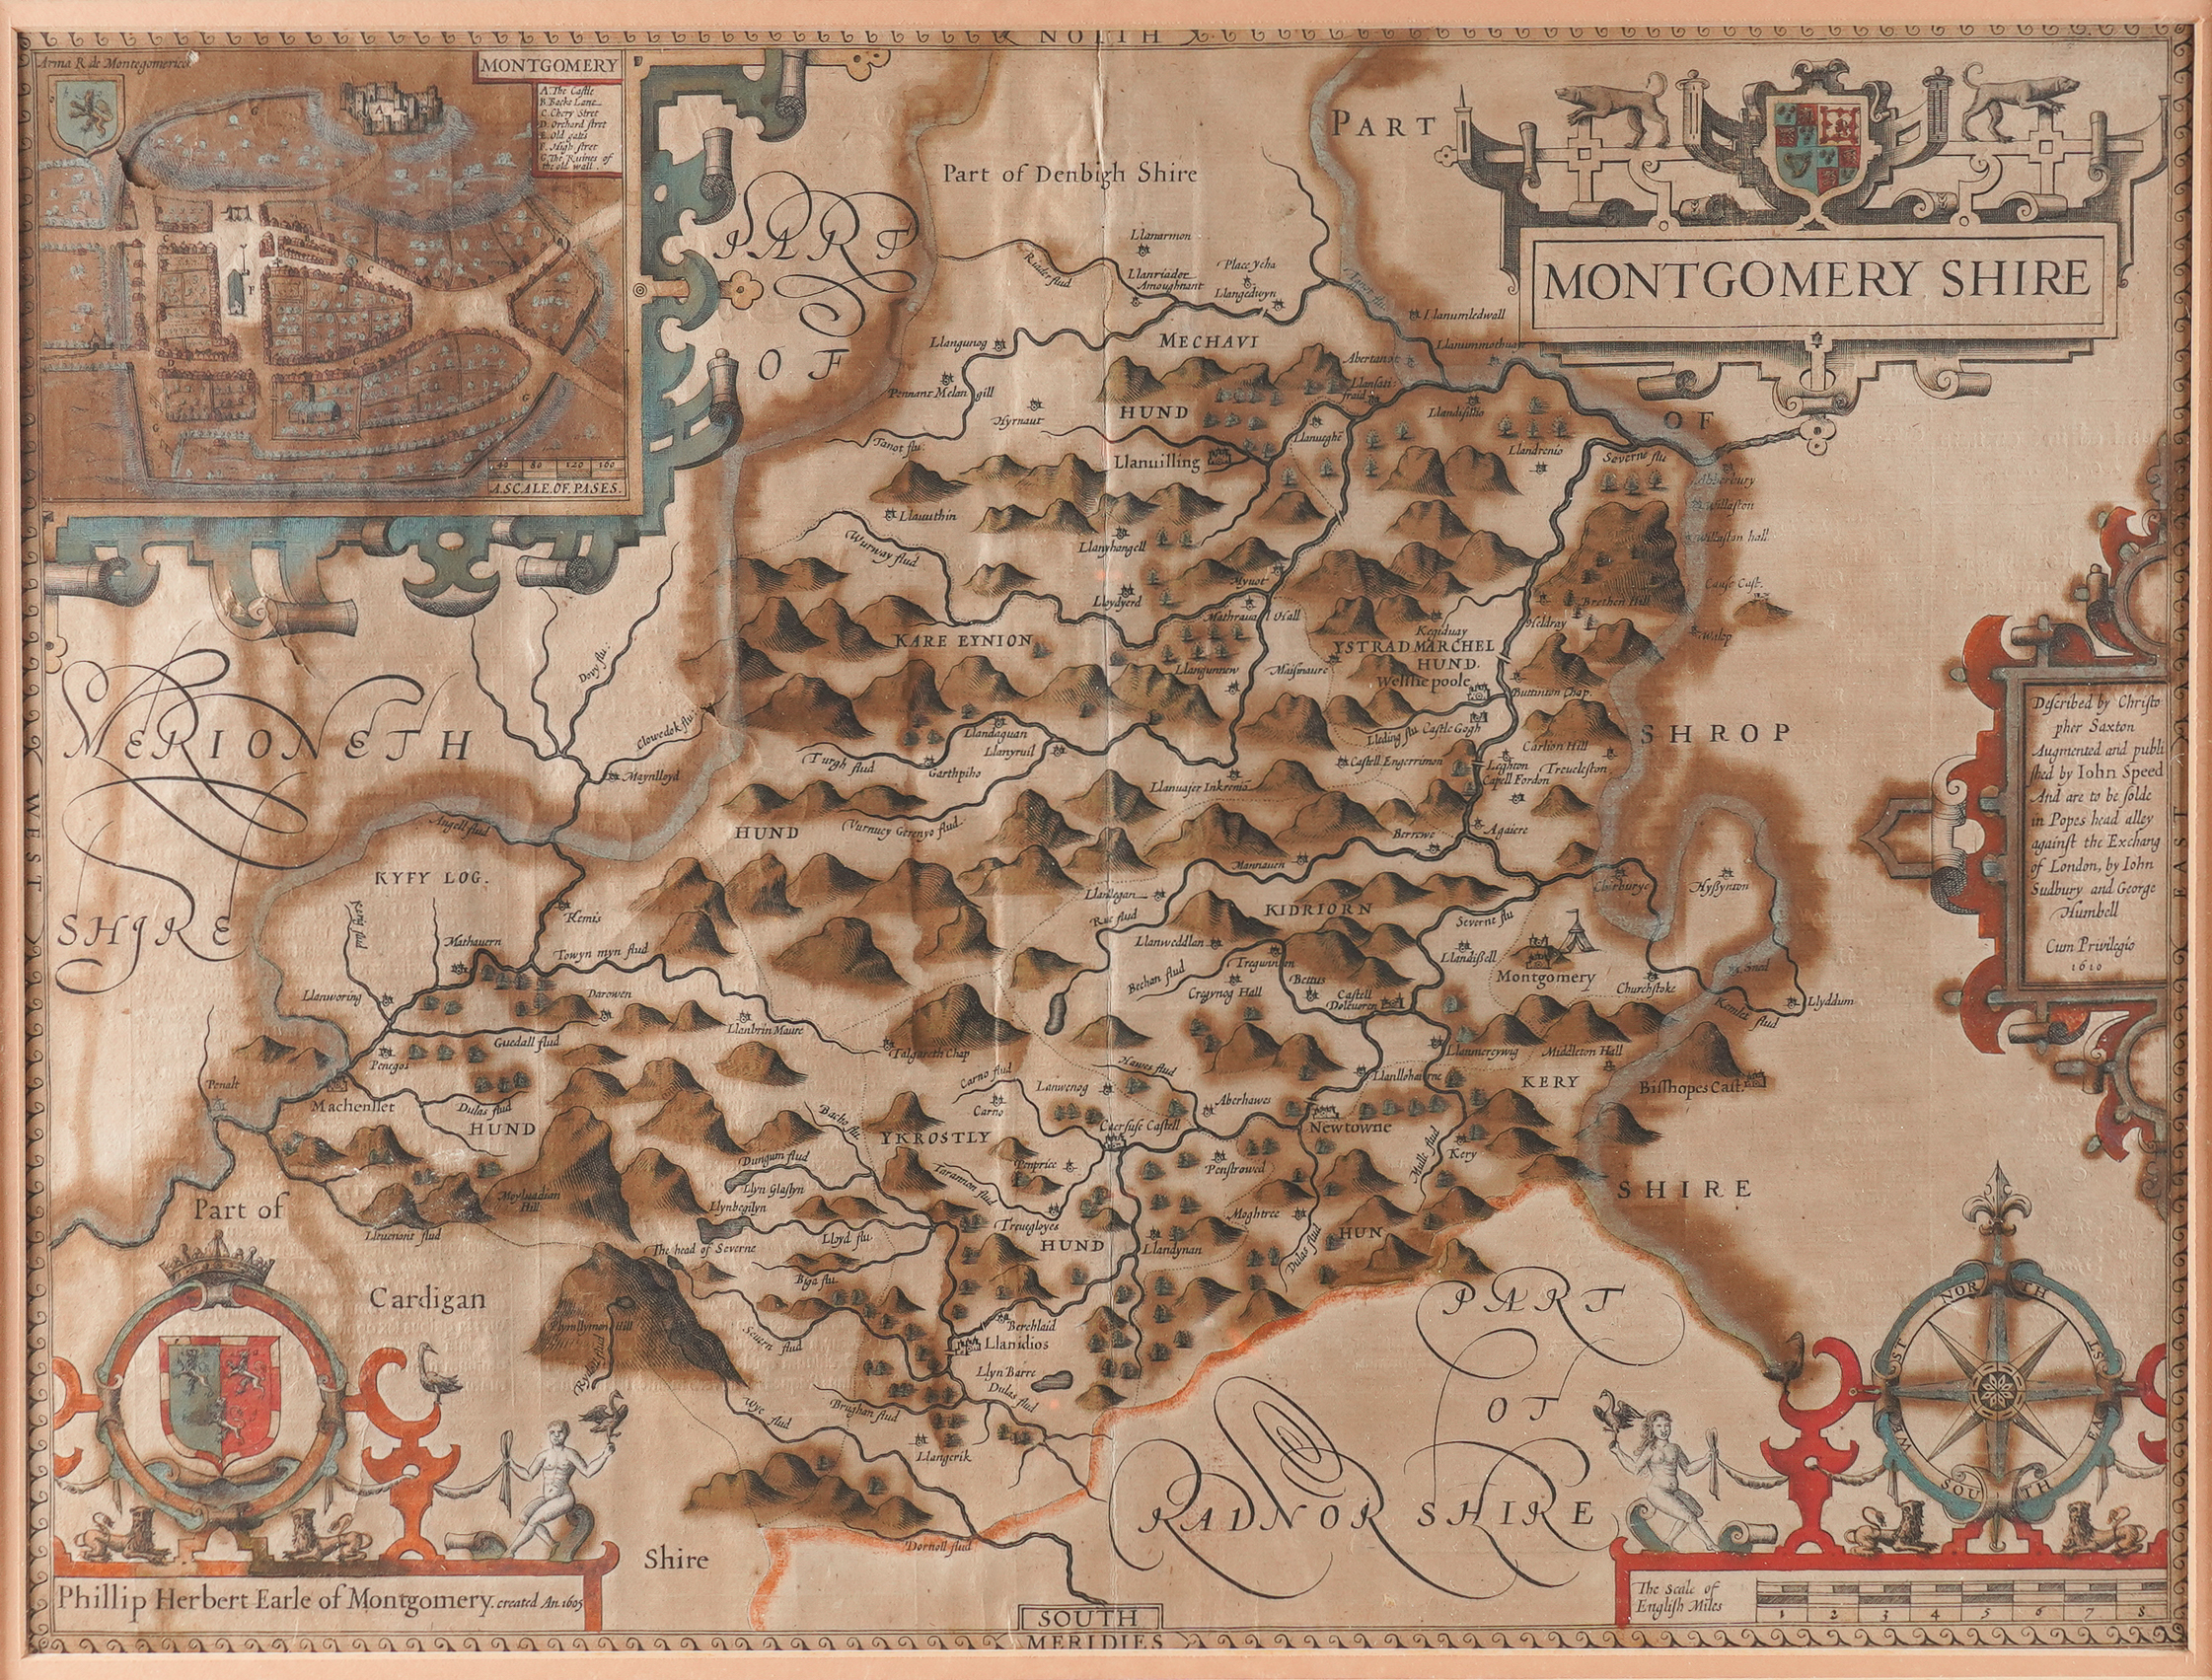 WALES - John SPEED (1551-1629). The Countye of Monmouth, [London], 1610 [but from the Latin... - Image 7 of 13